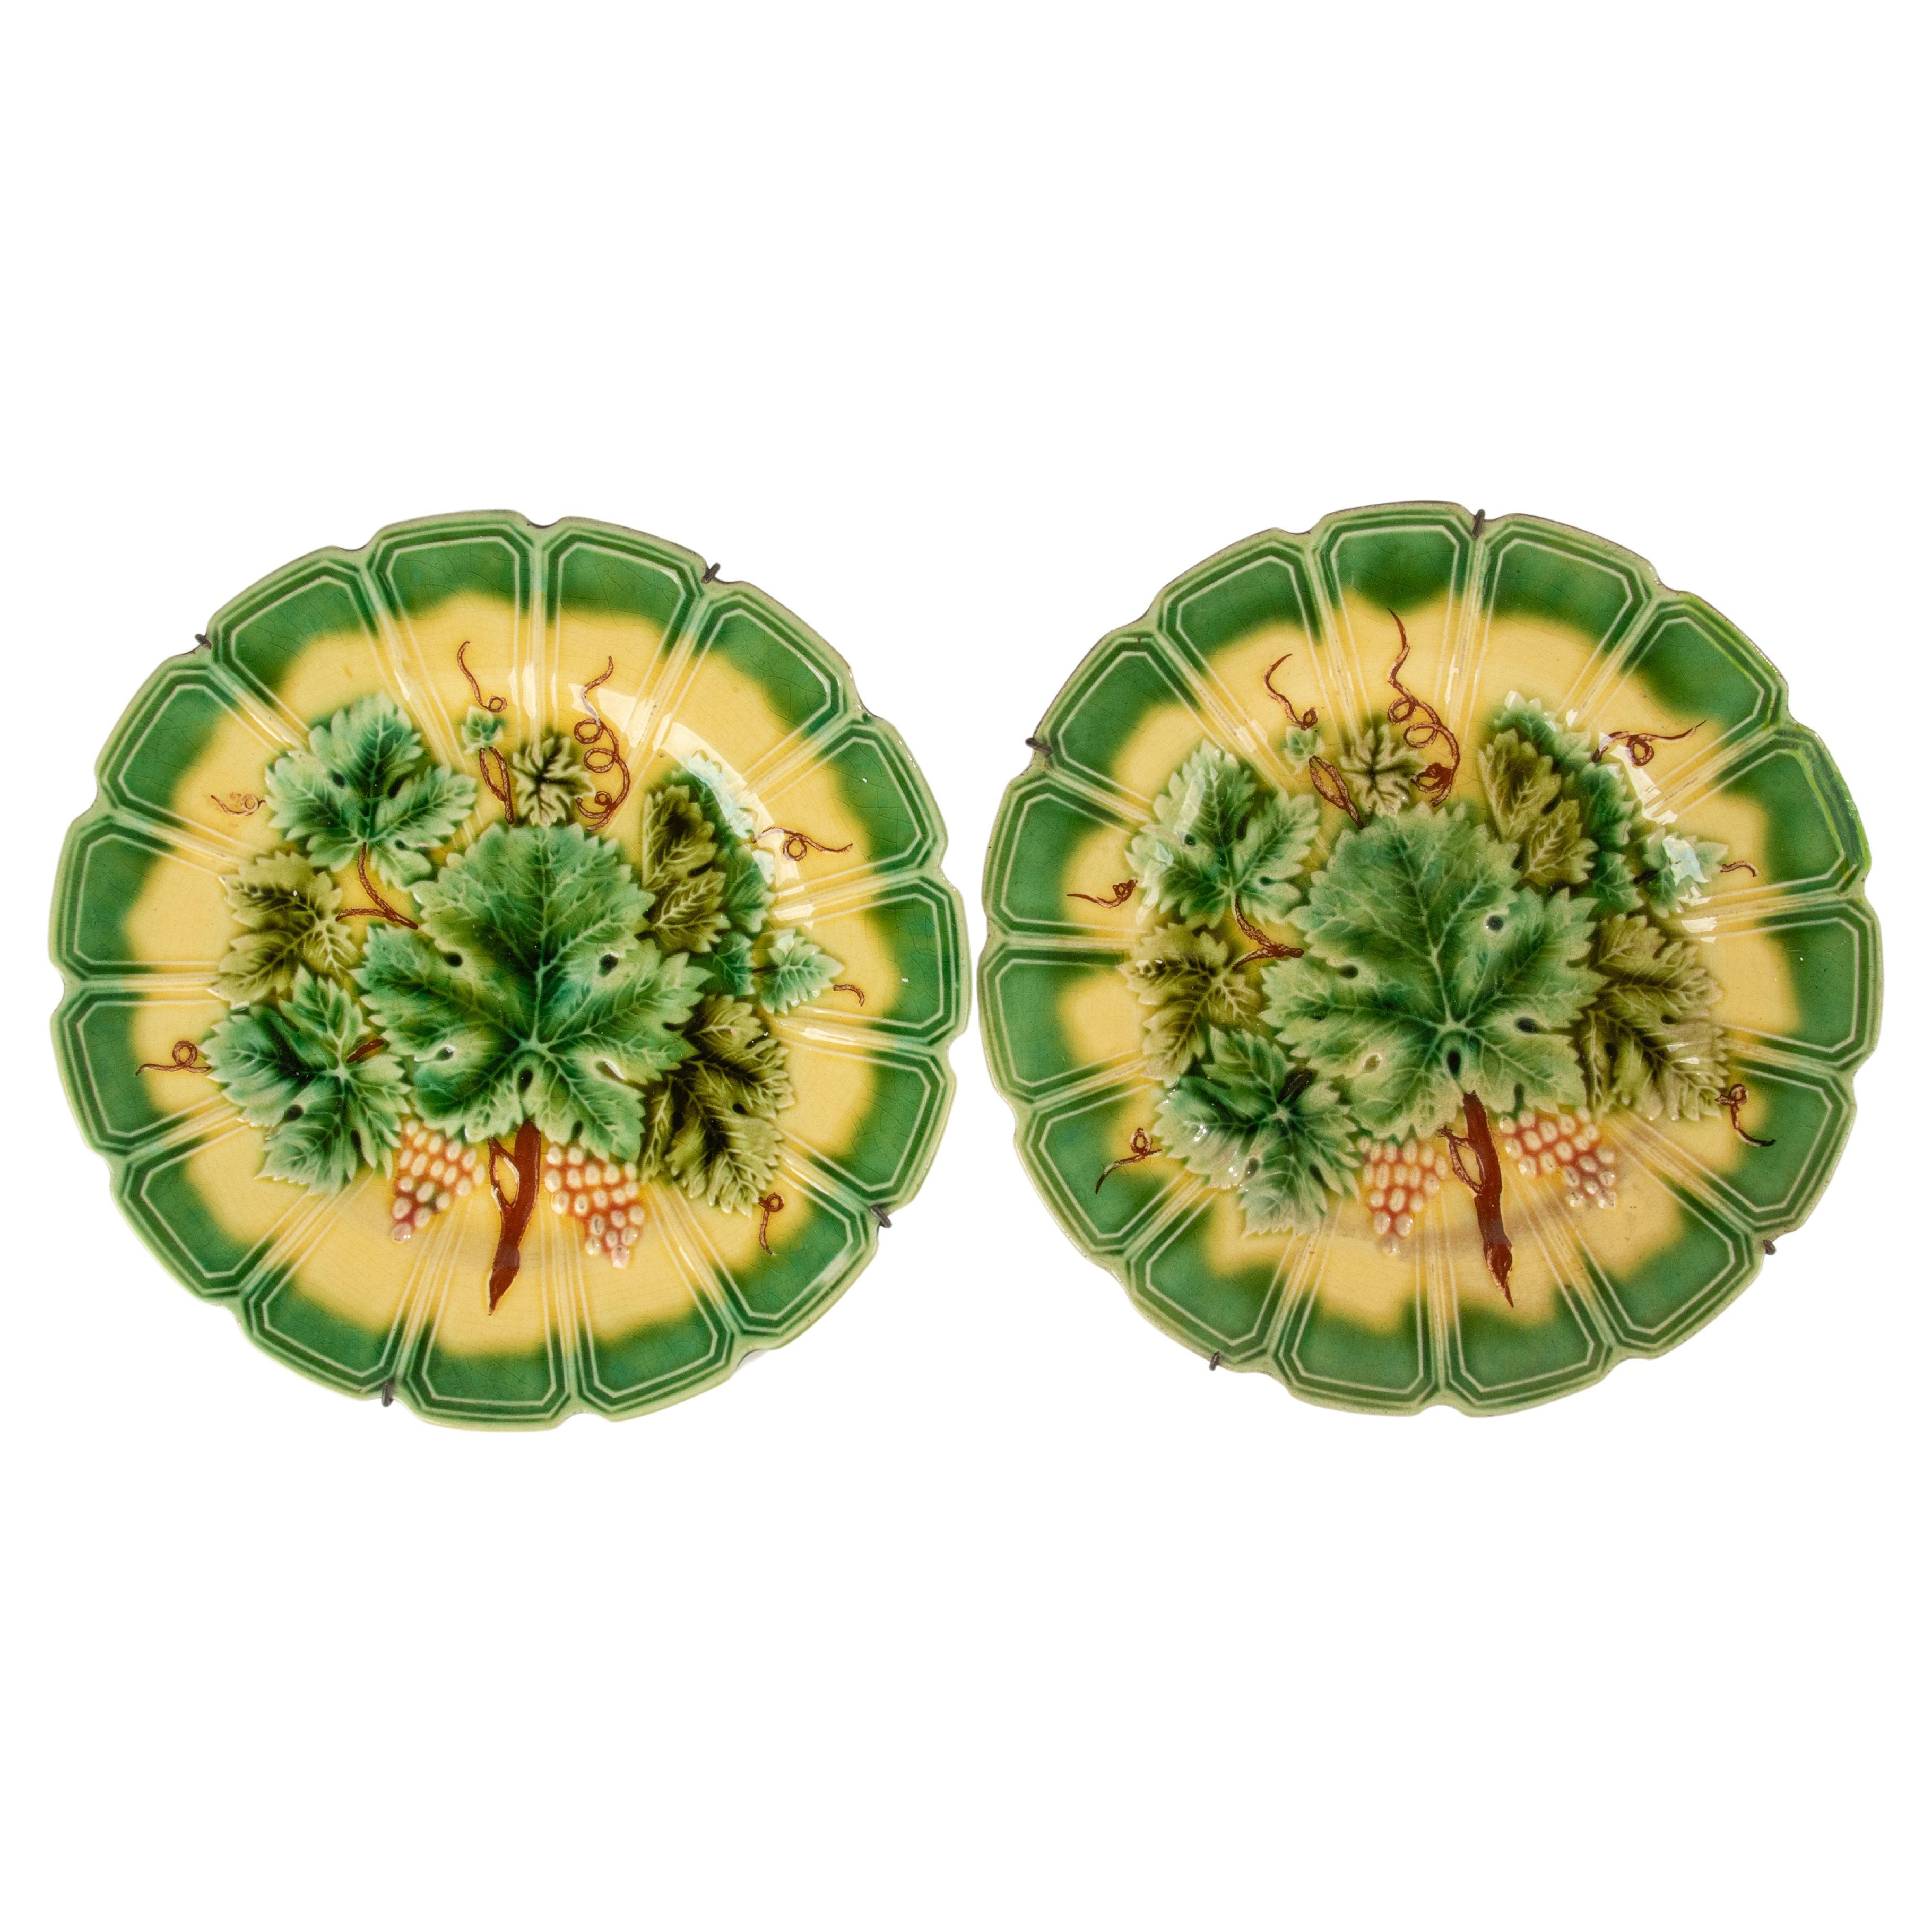 A Set of 2 Antique Majolica Plates made by Sarreguemines  For Sale